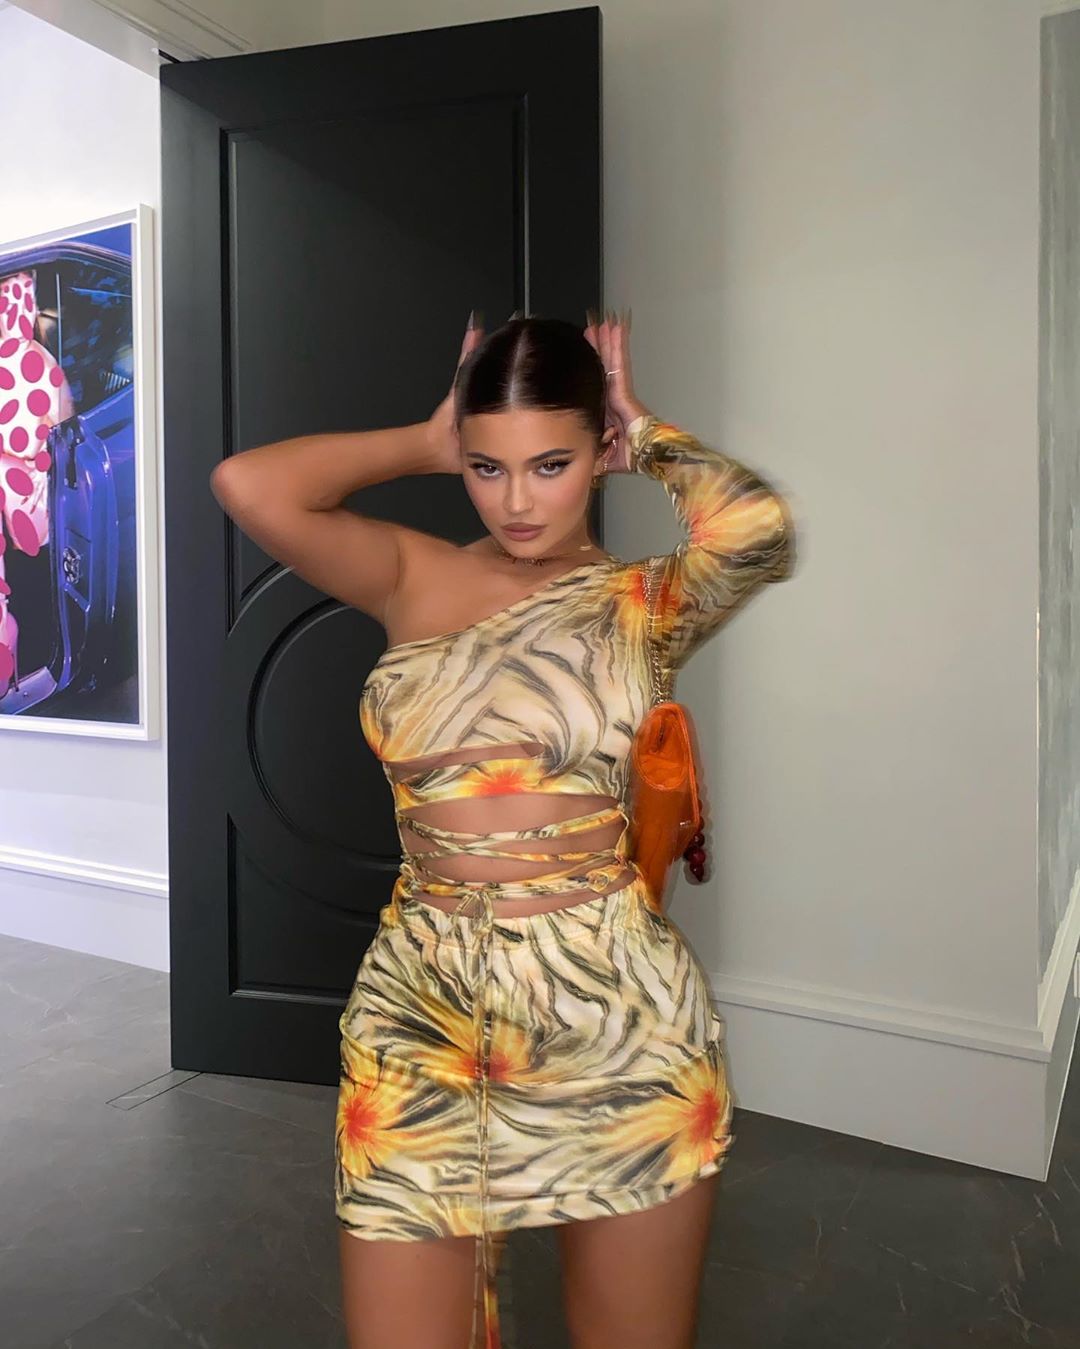 Kylie Jenner Shows Off Her Curves! - Photo 5